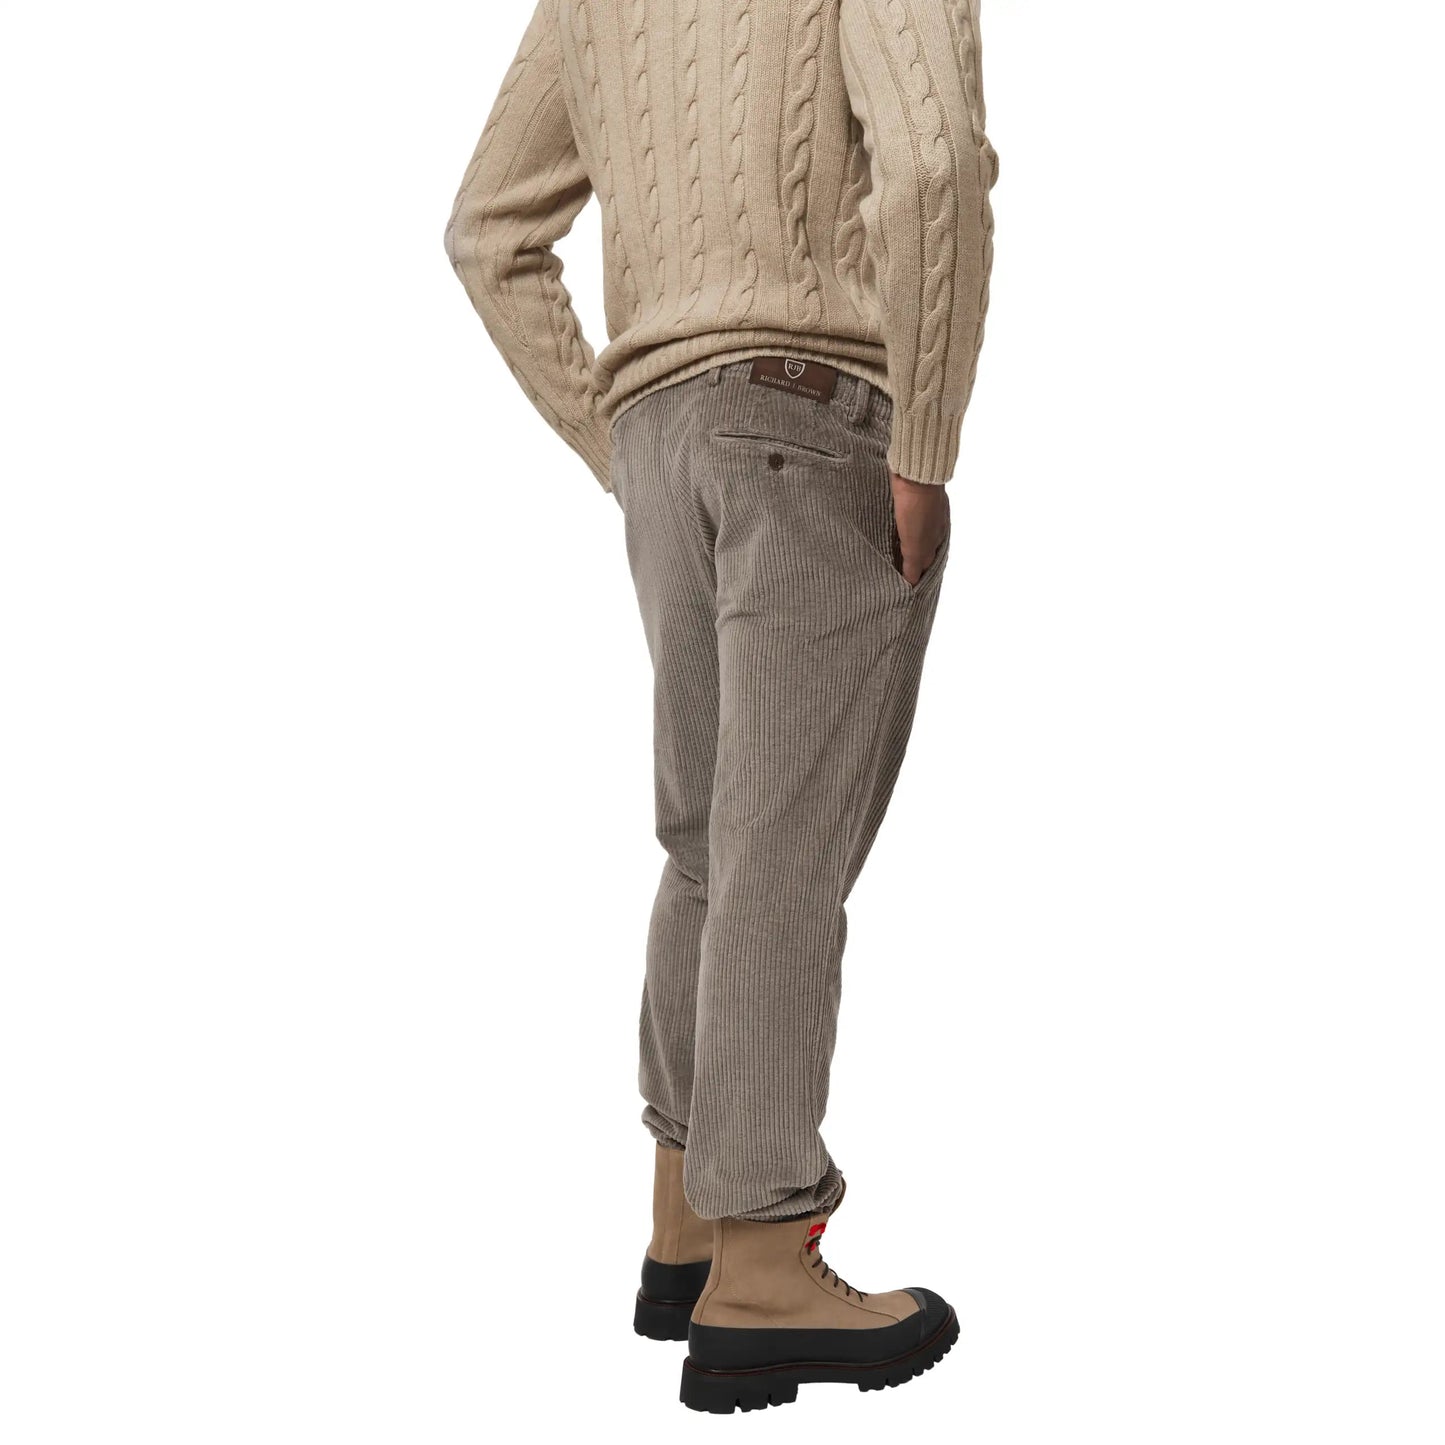 Richard J. Brown Slim - Fit Stretch - Cotton Velvet Trousers in Taupe - SARTALE